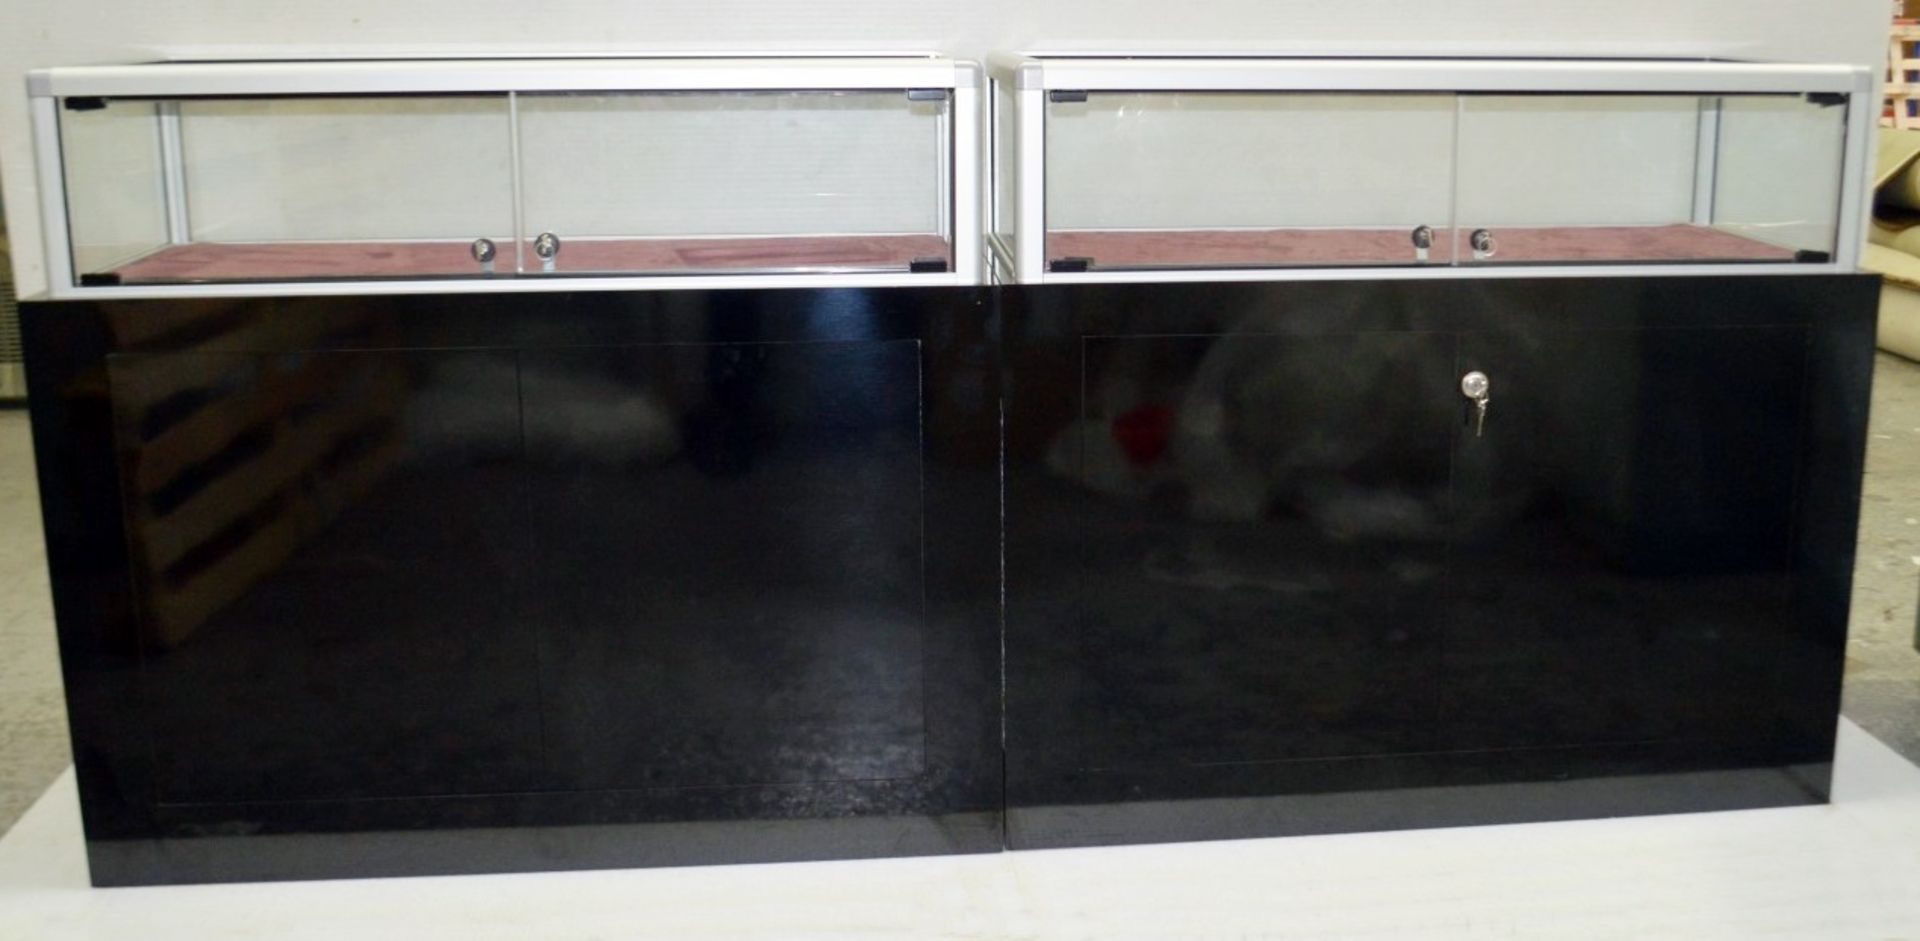 Pair Of Retail Counters With Lockable Display Cabinets And Undercounter Storage - Image 9 of 9